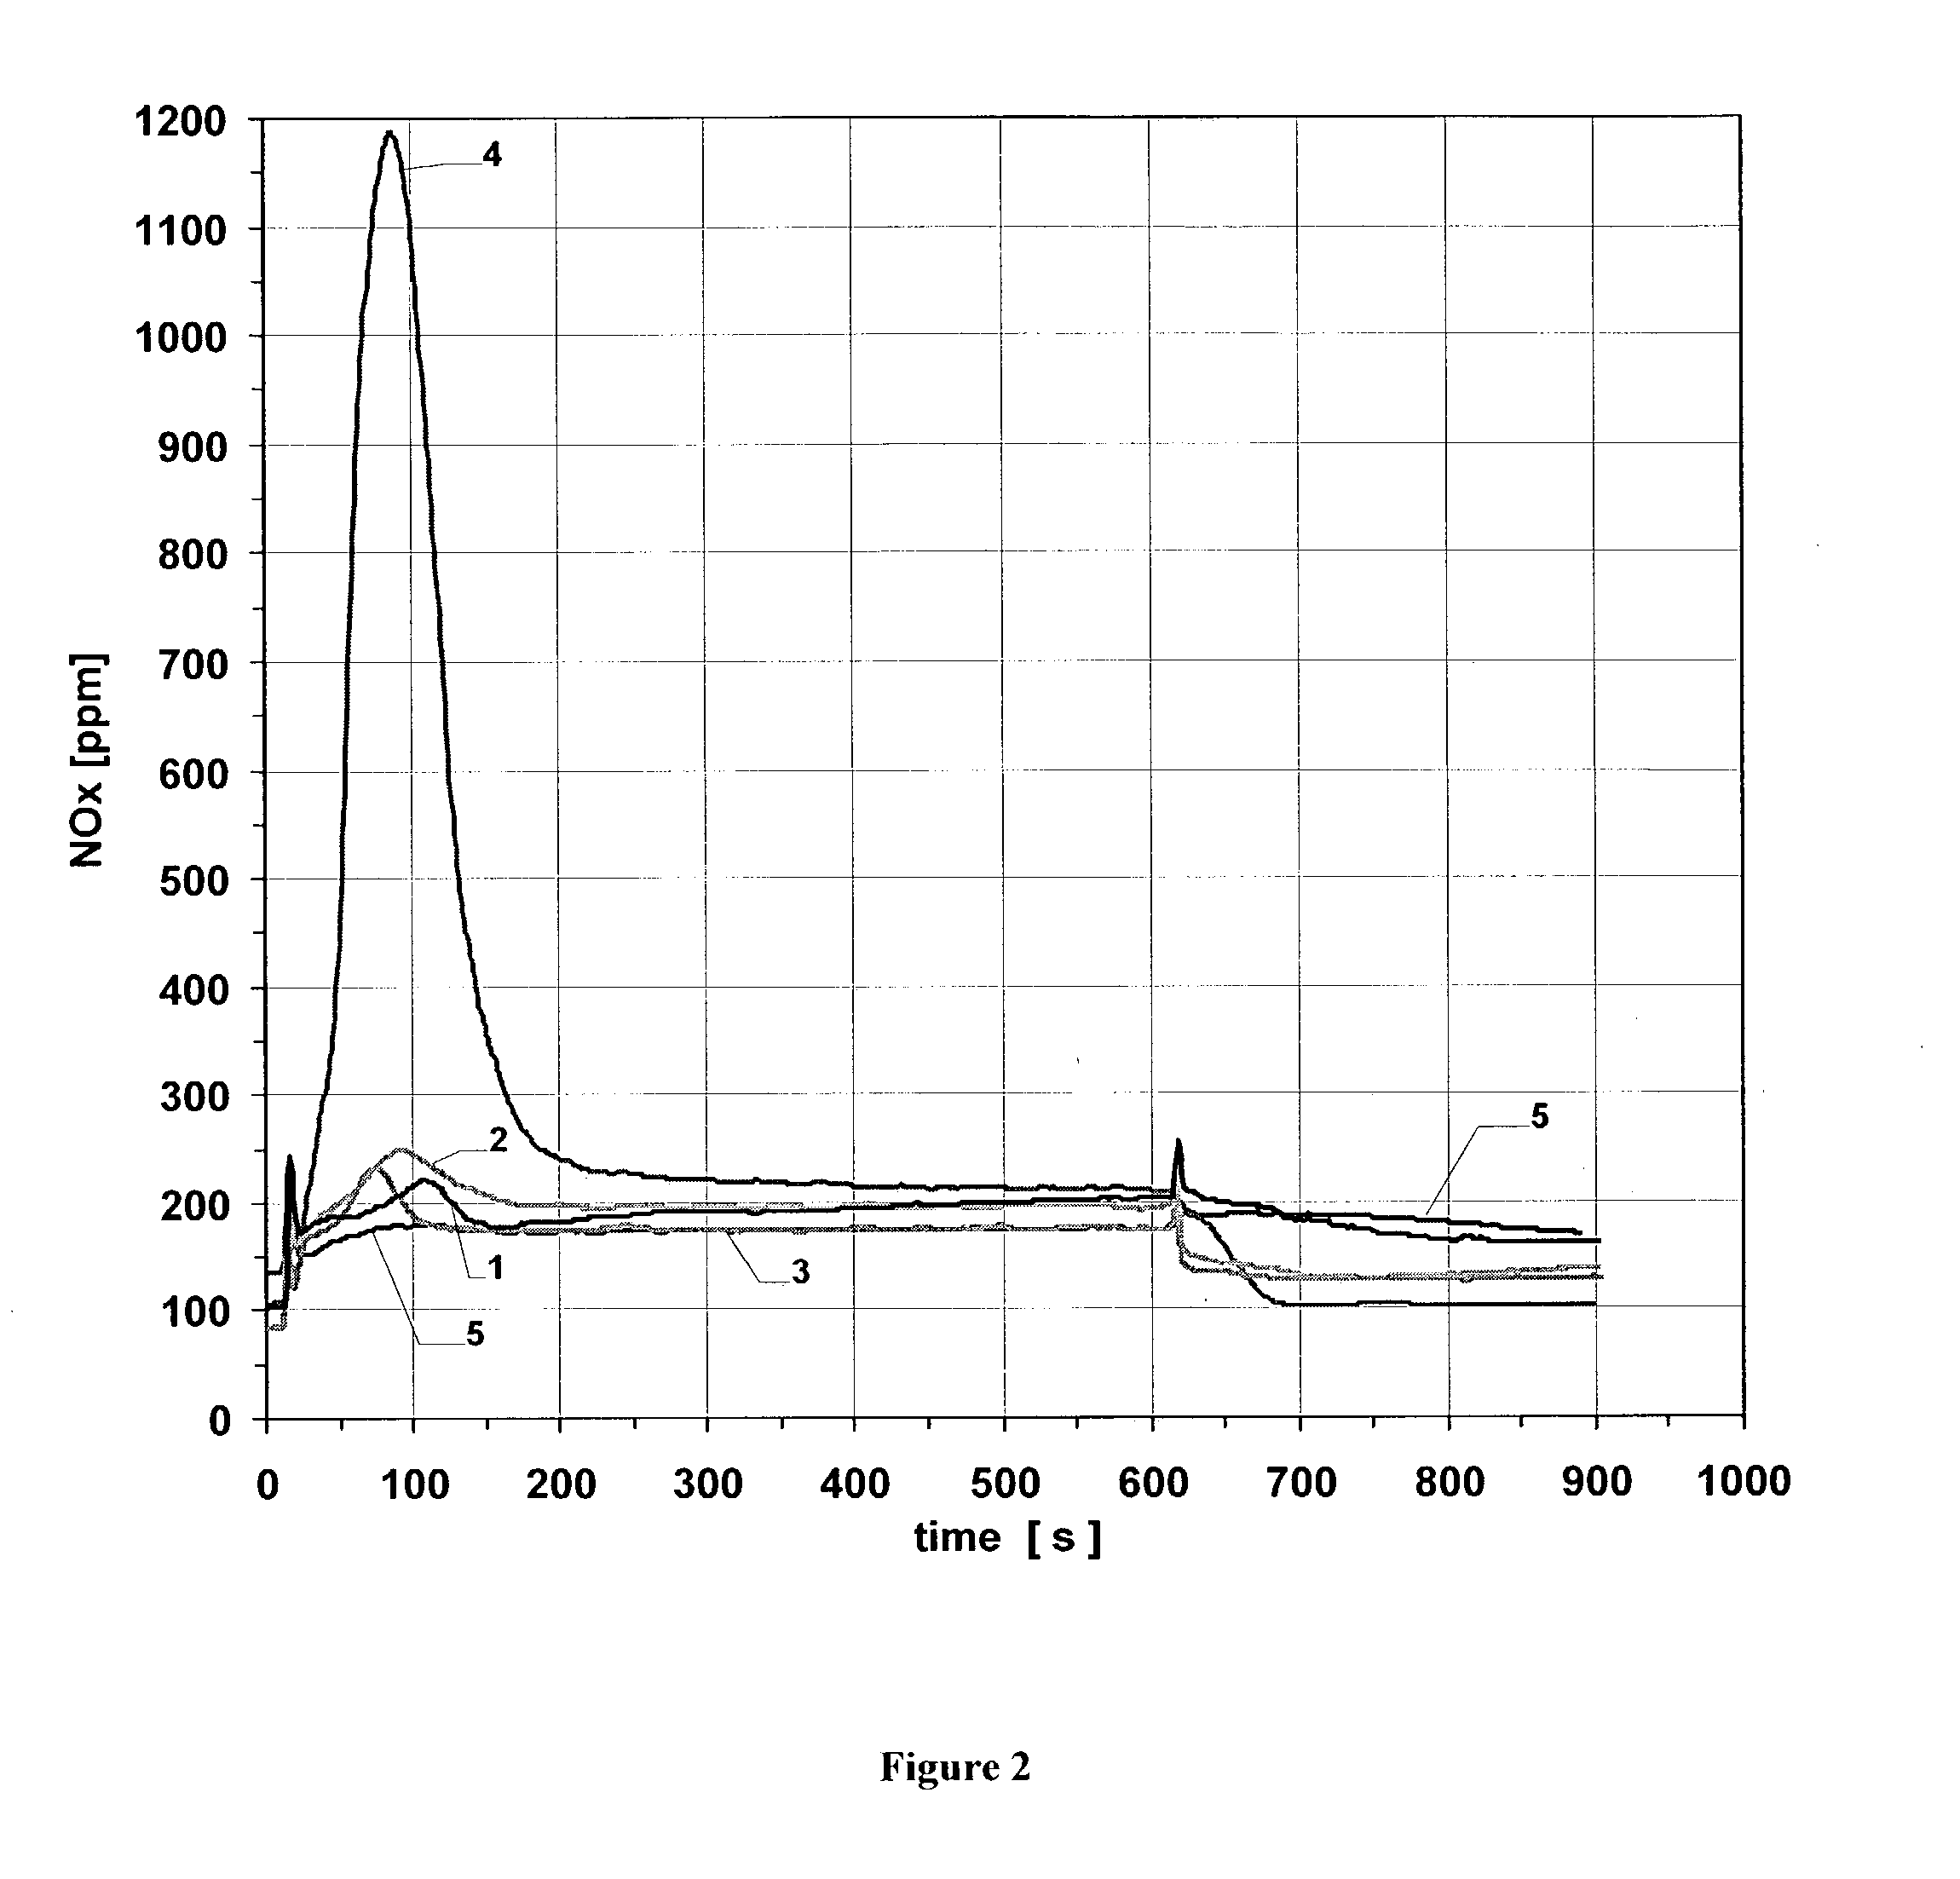 Particle filter having a catalytically active coating to accelerate burning off accumulated soot particles during a regeneration phase